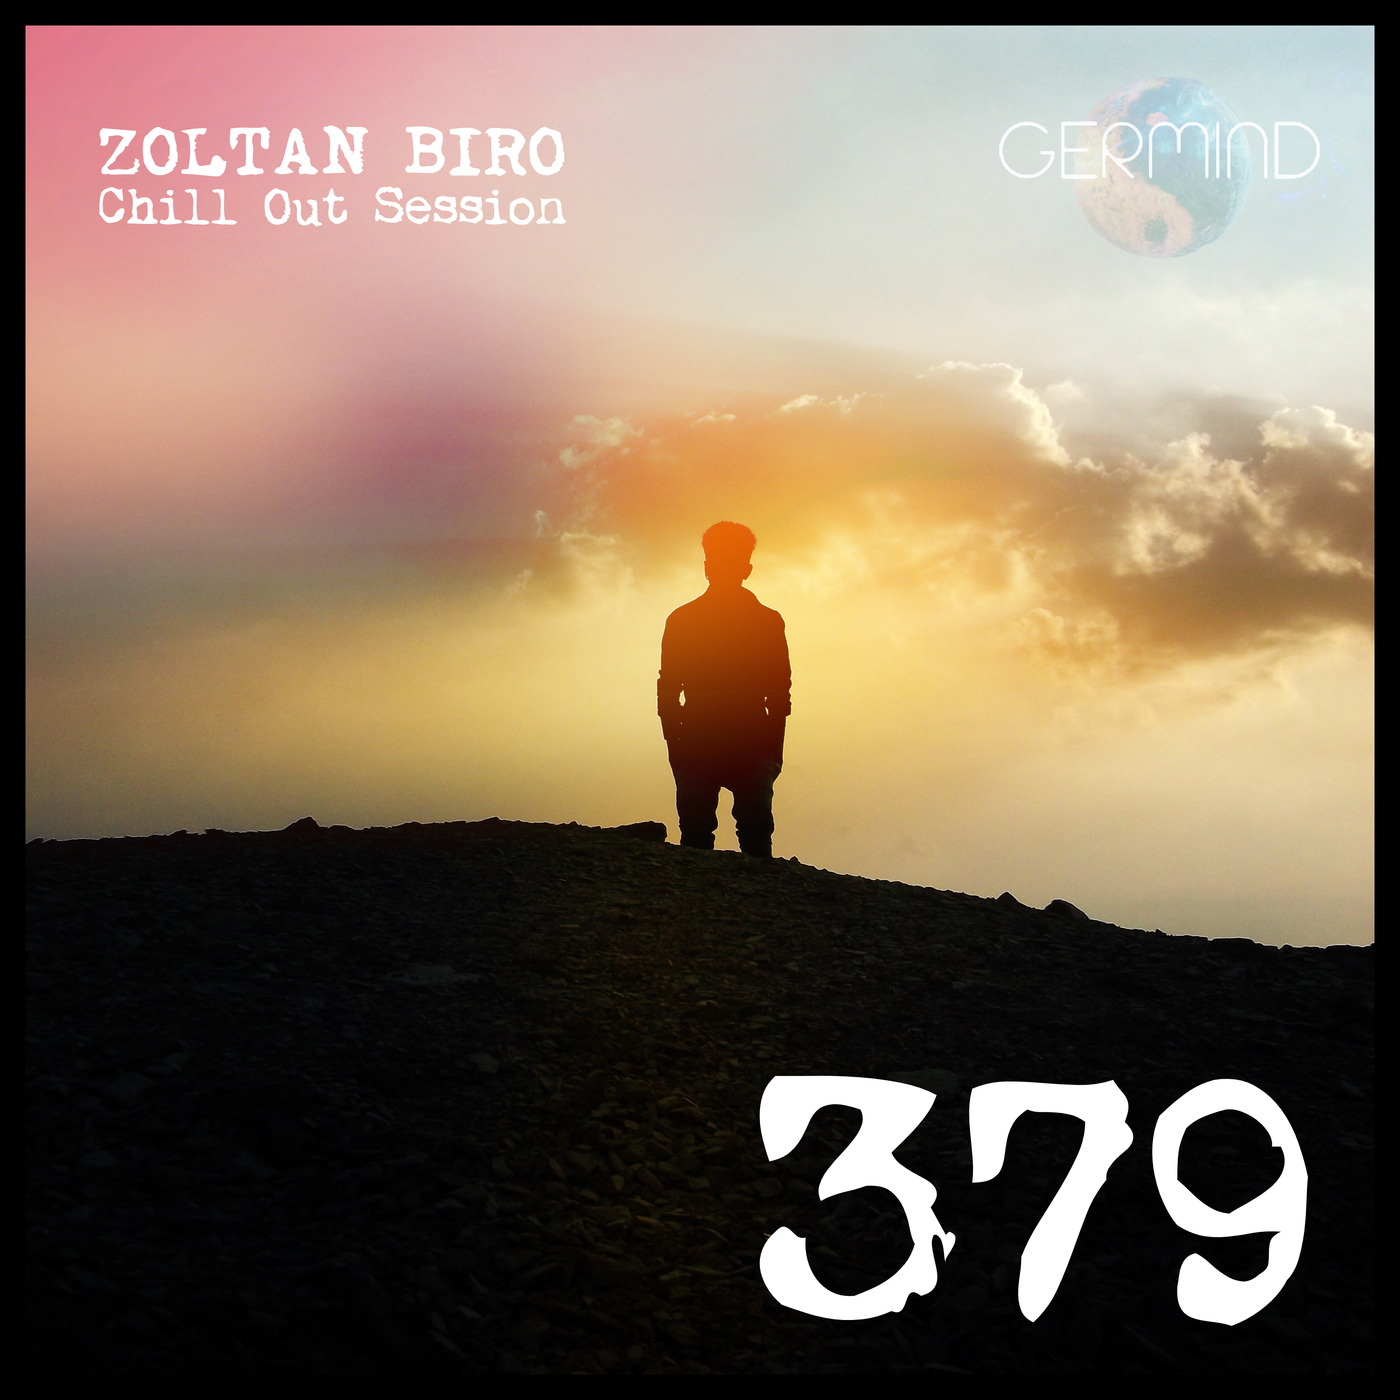 Zoltan Biro - Chill Out Session 379 [including: Germind Special Mix]